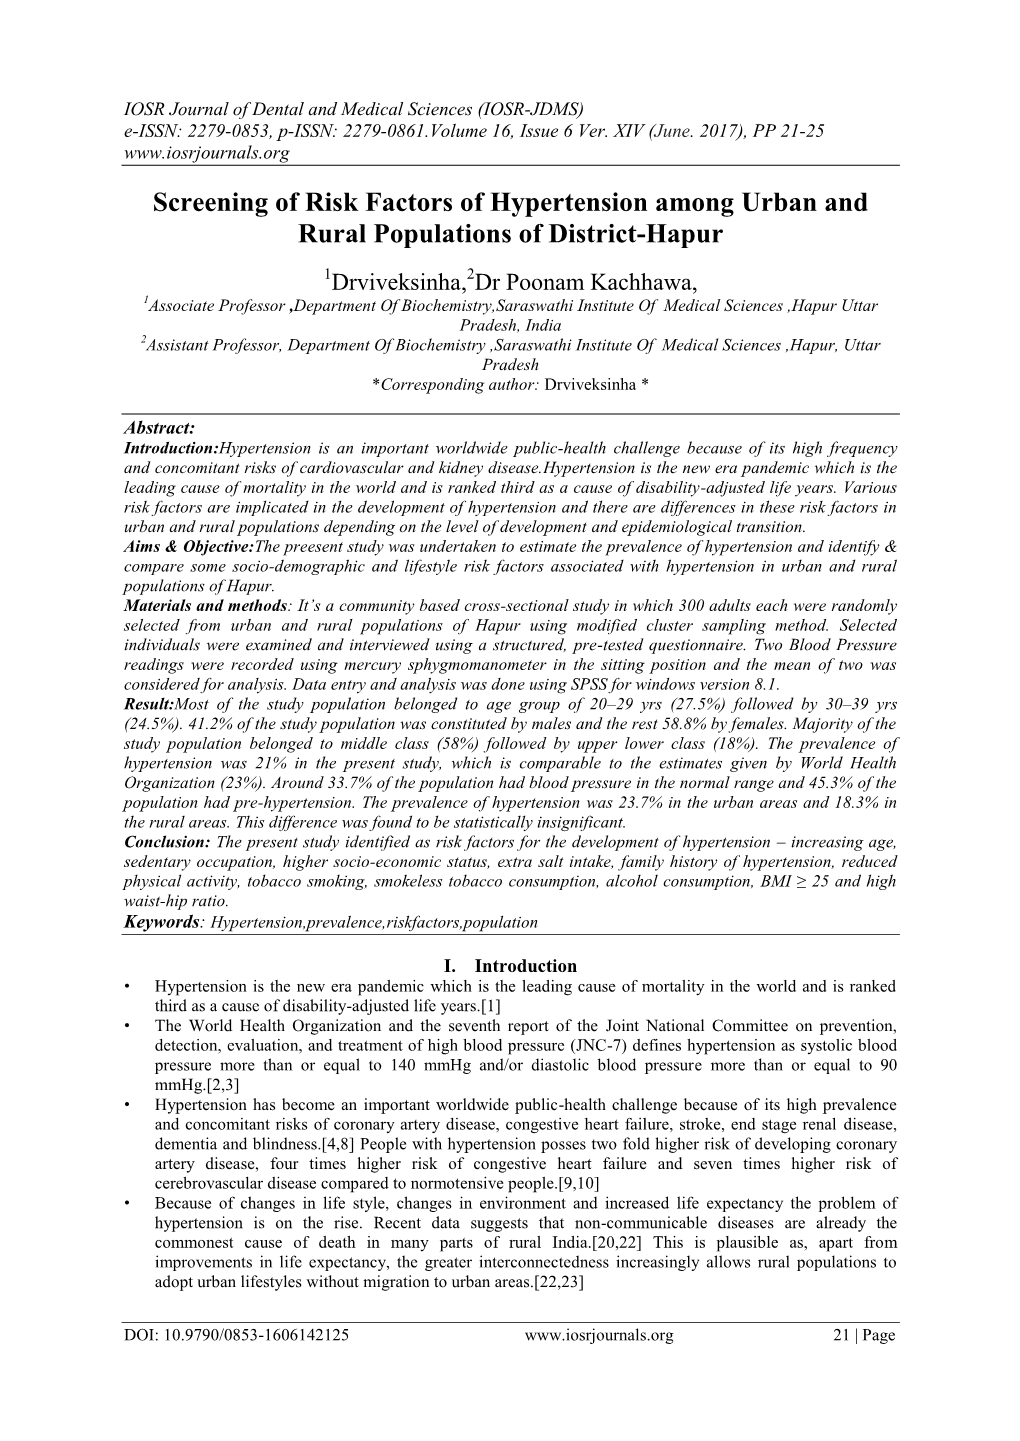 Screening of Risk Factors of Hypertension Among Urban and Rural Populations of District-Hapur